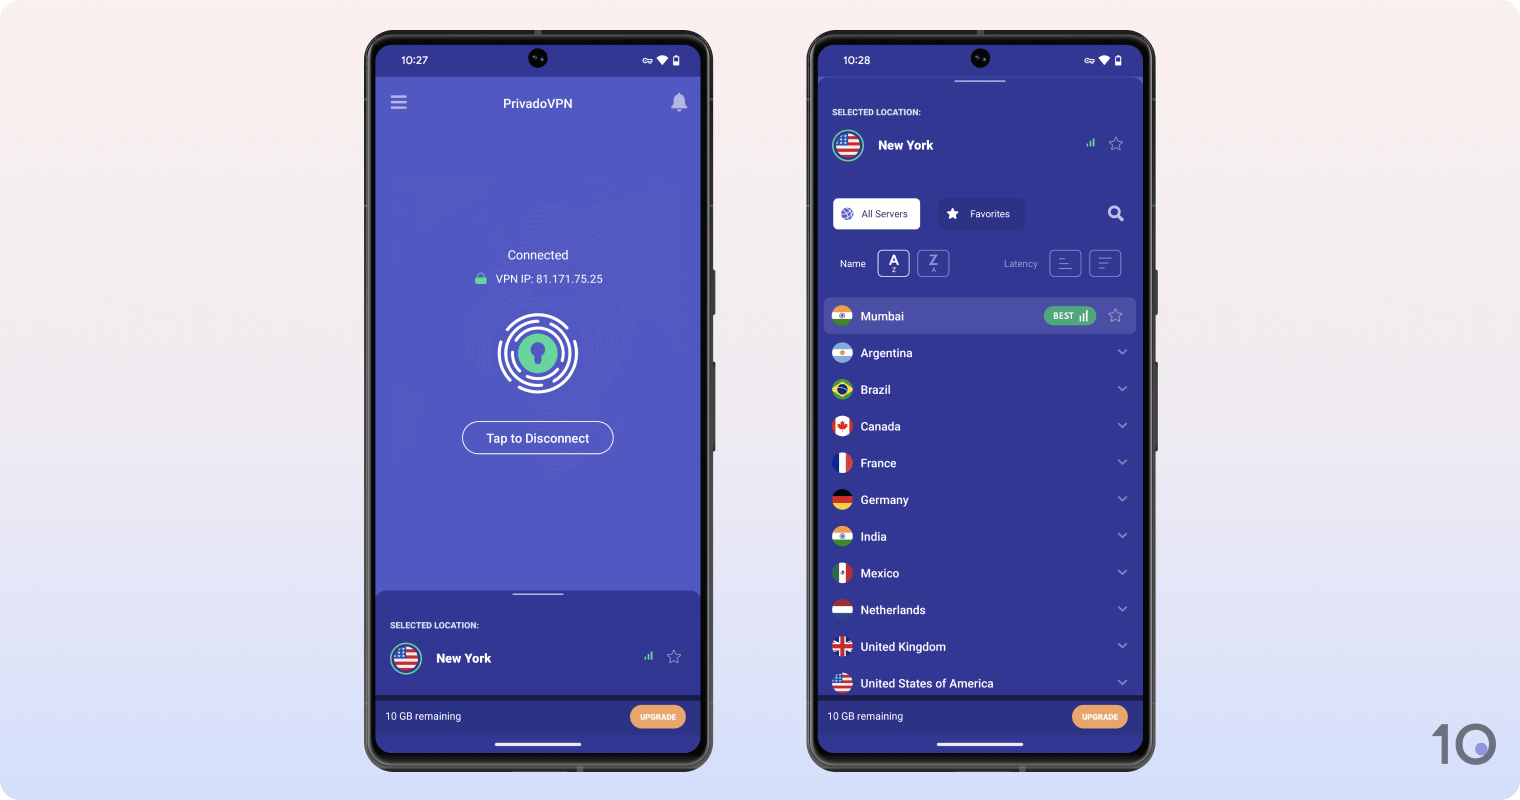 PrivadoVPN Free's app for Android